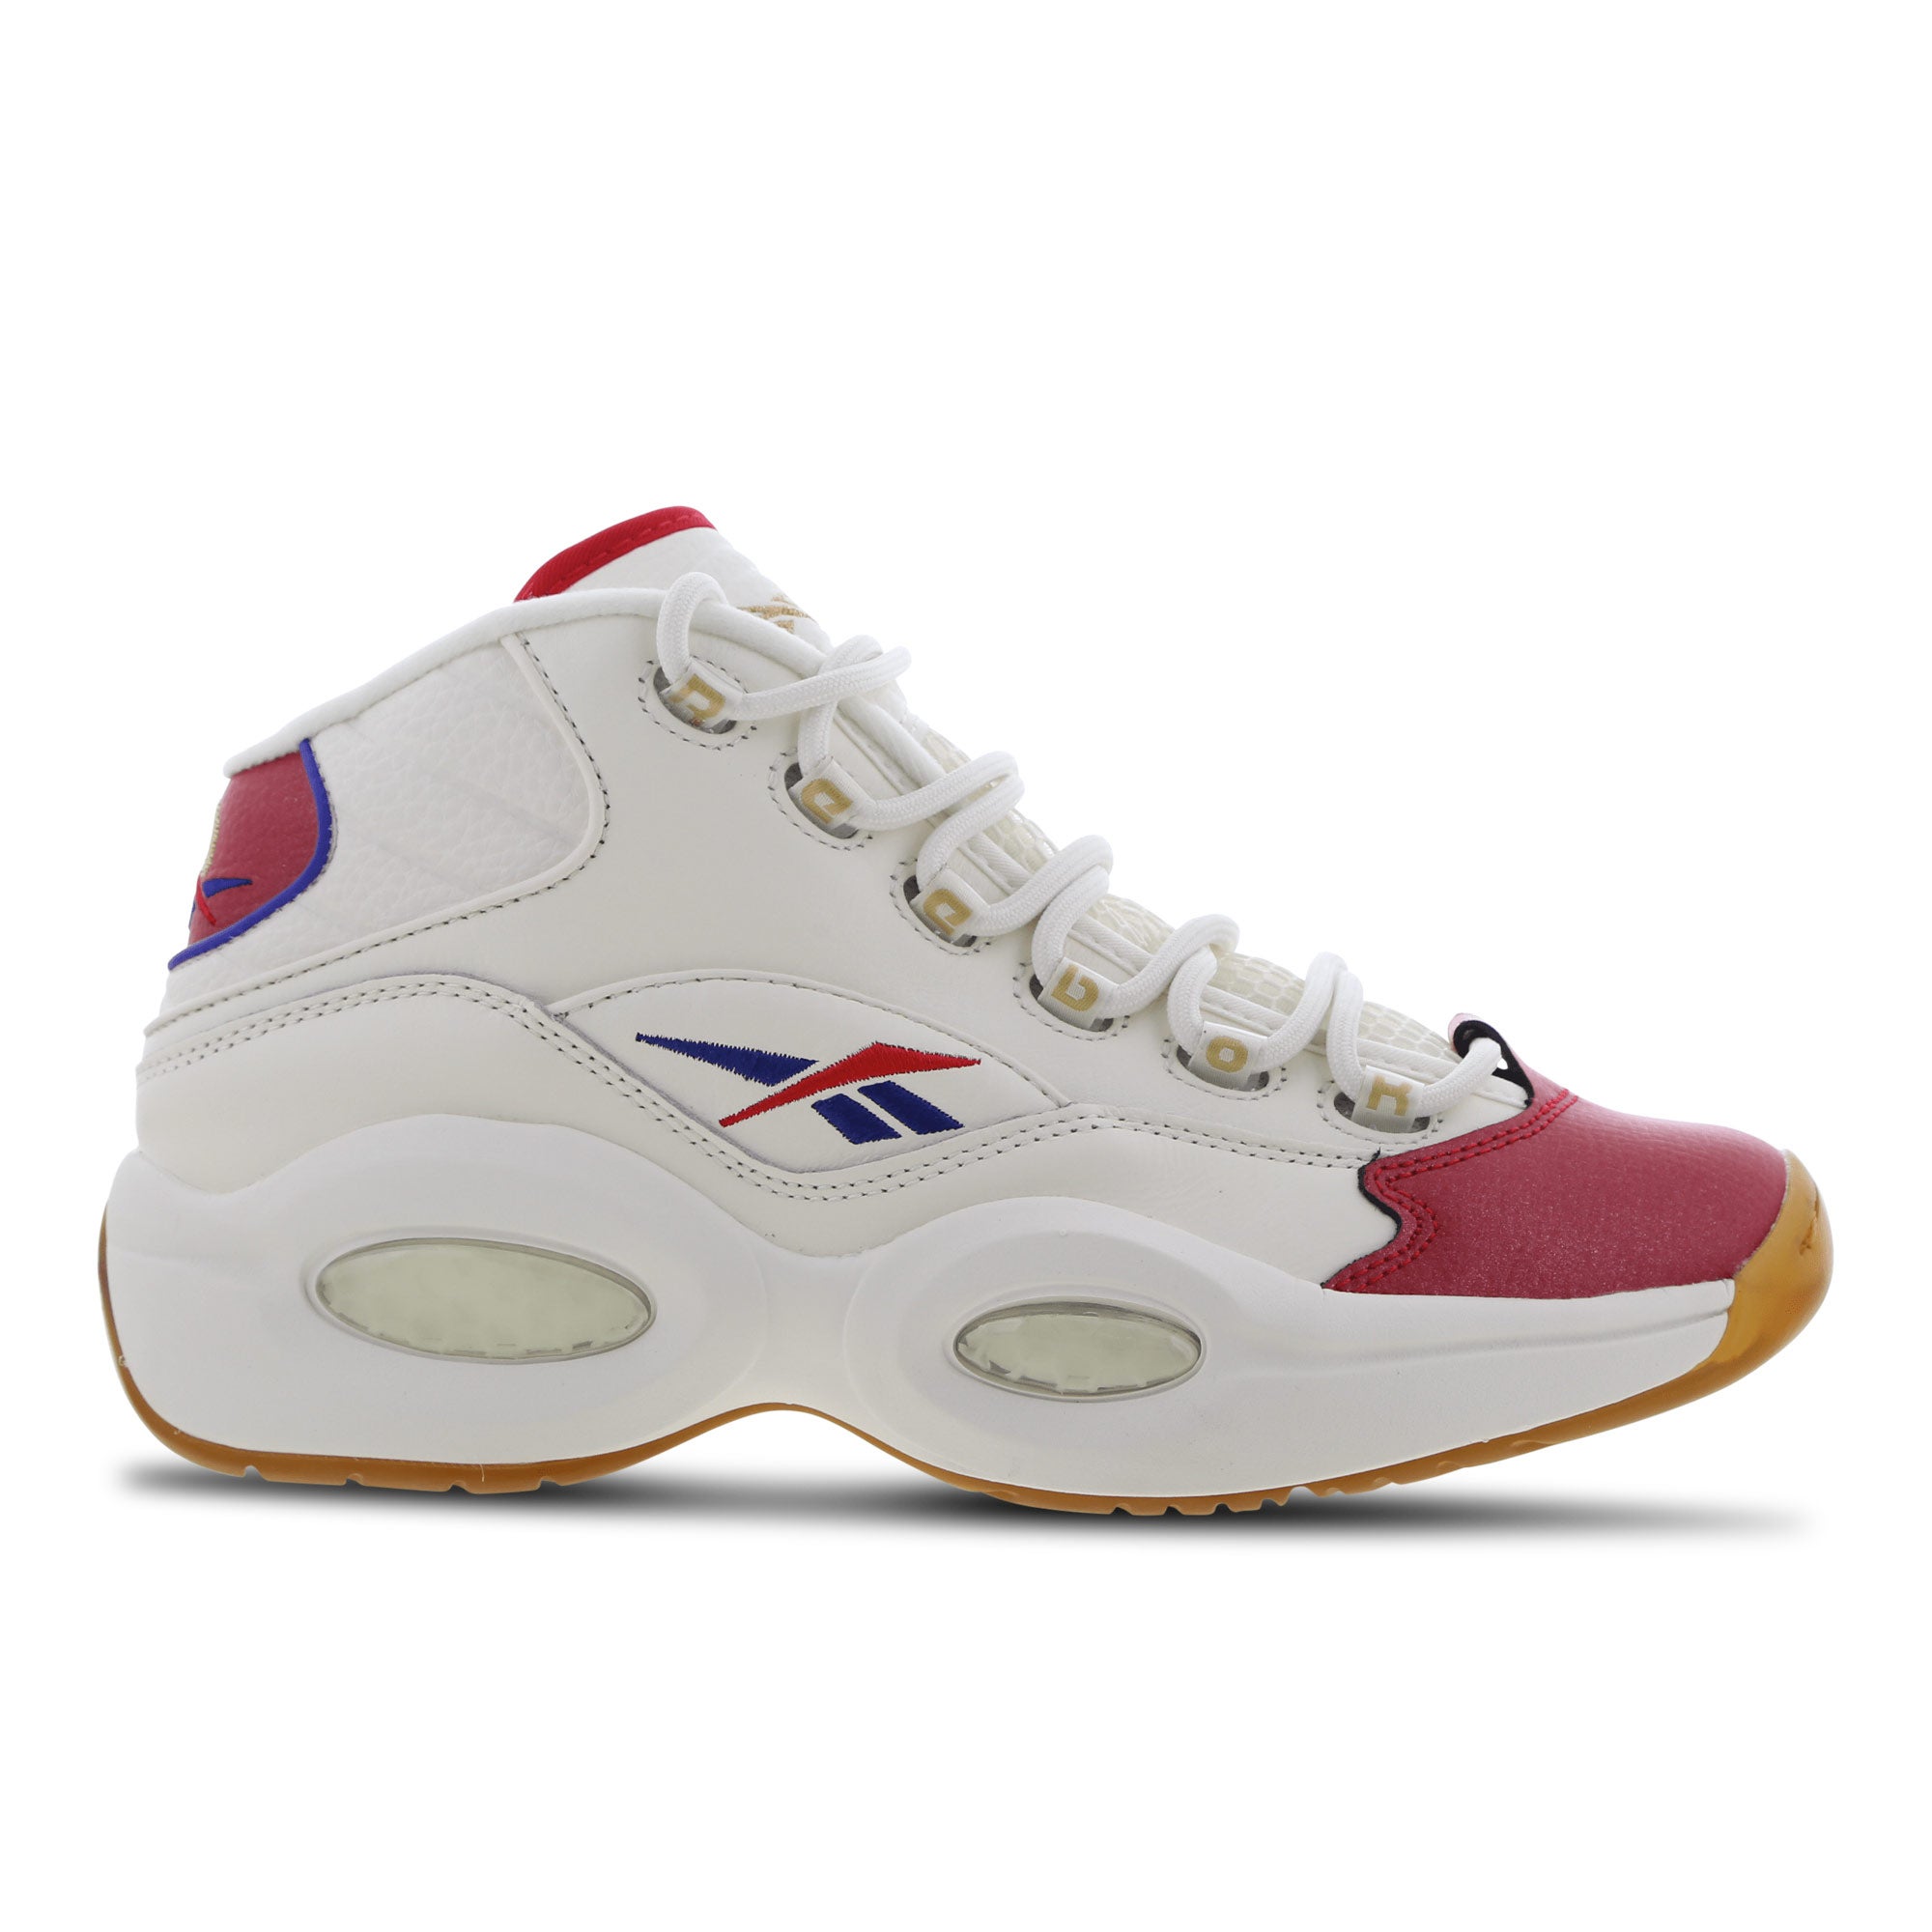 Reebok Question Mid Red Toe Shoes